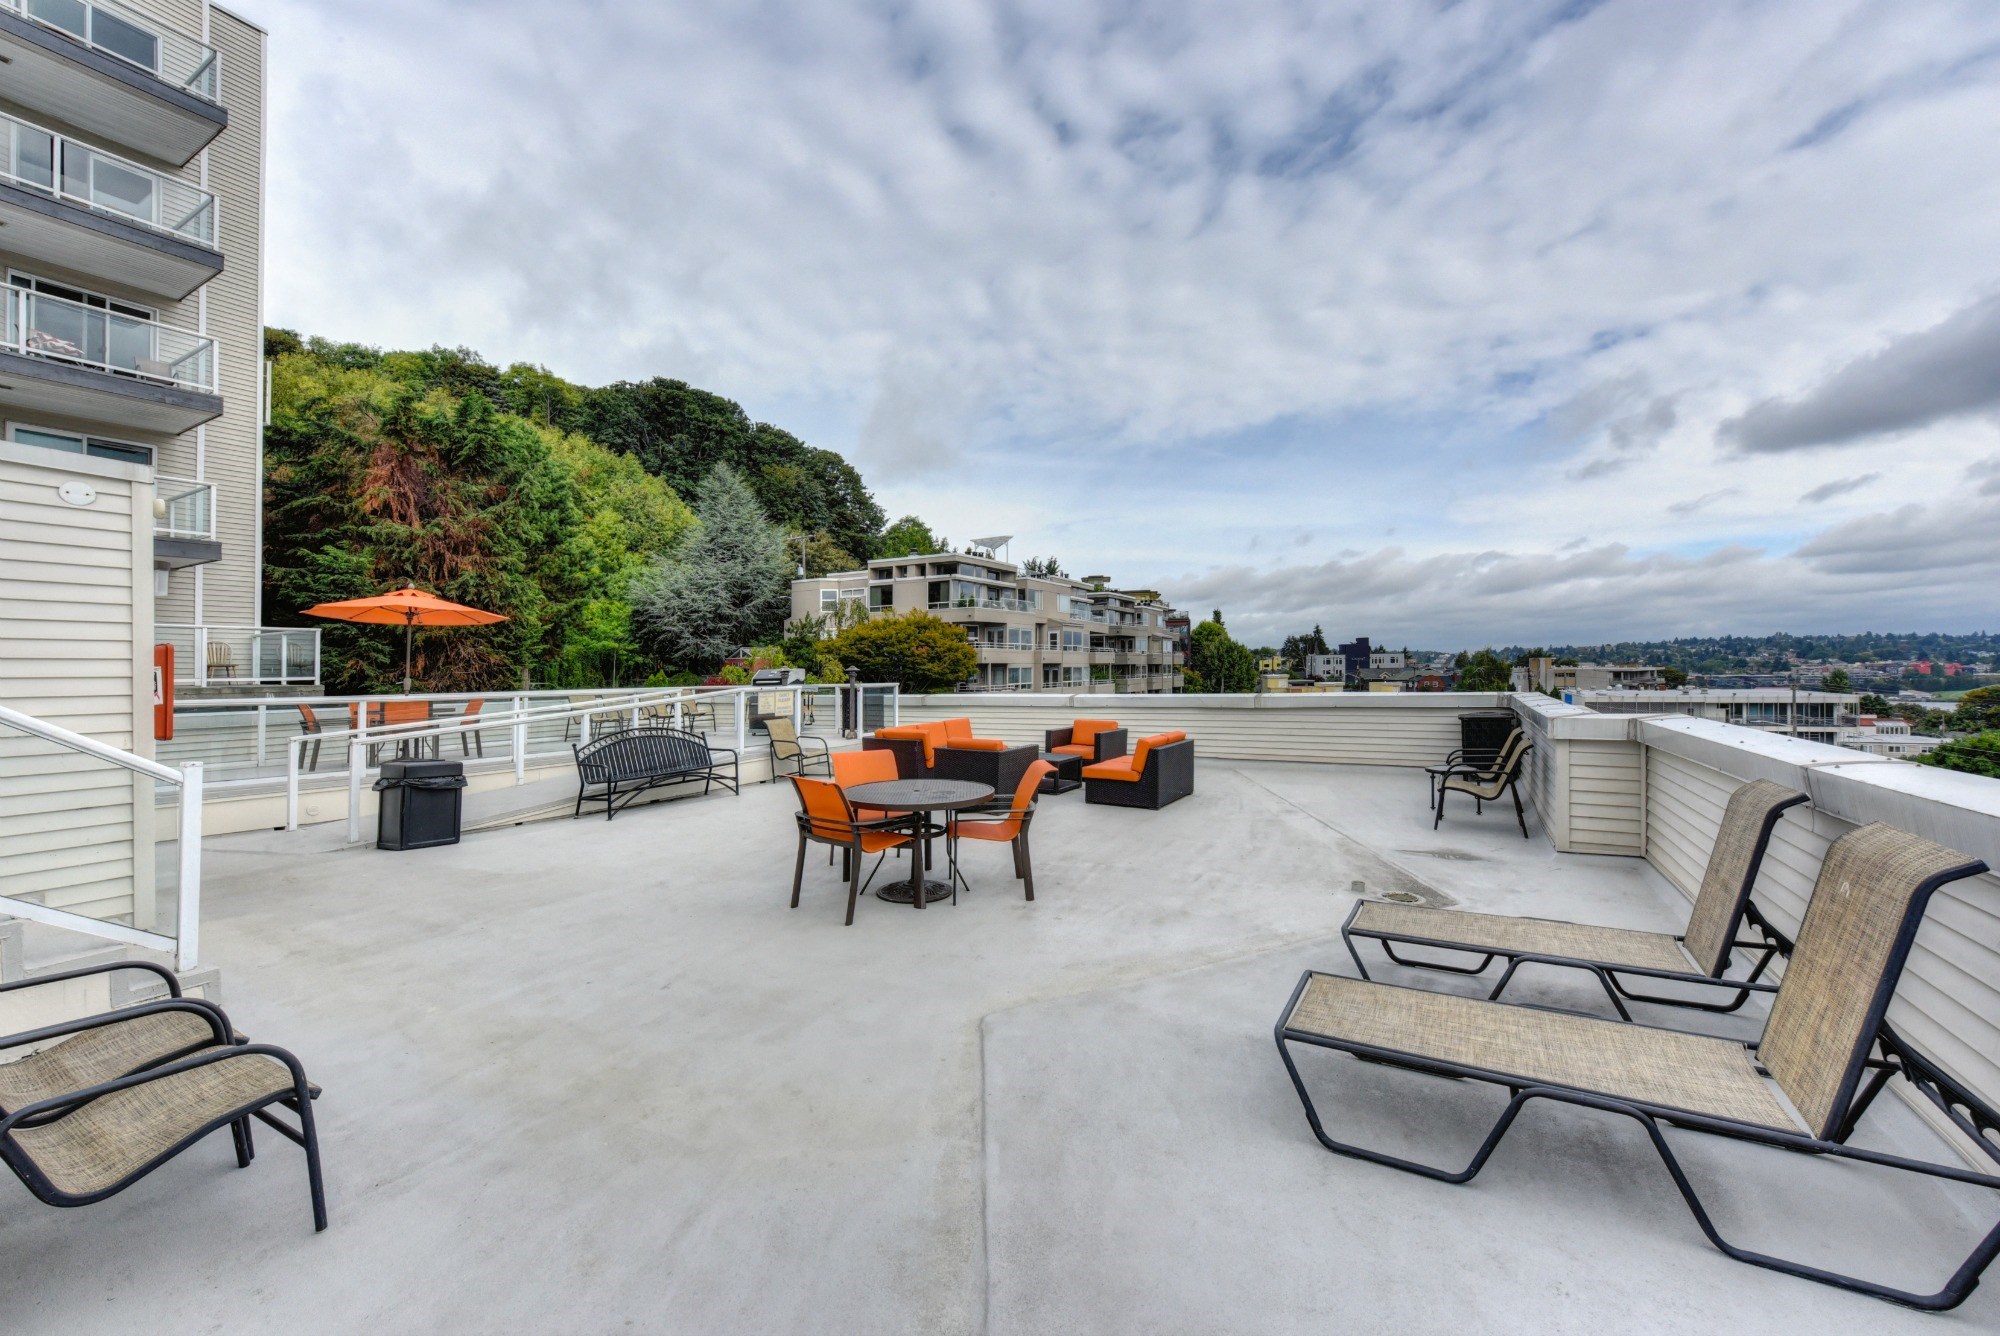 Rooftop Lounge with Lounge Chairs, Orange Chairs and Trees